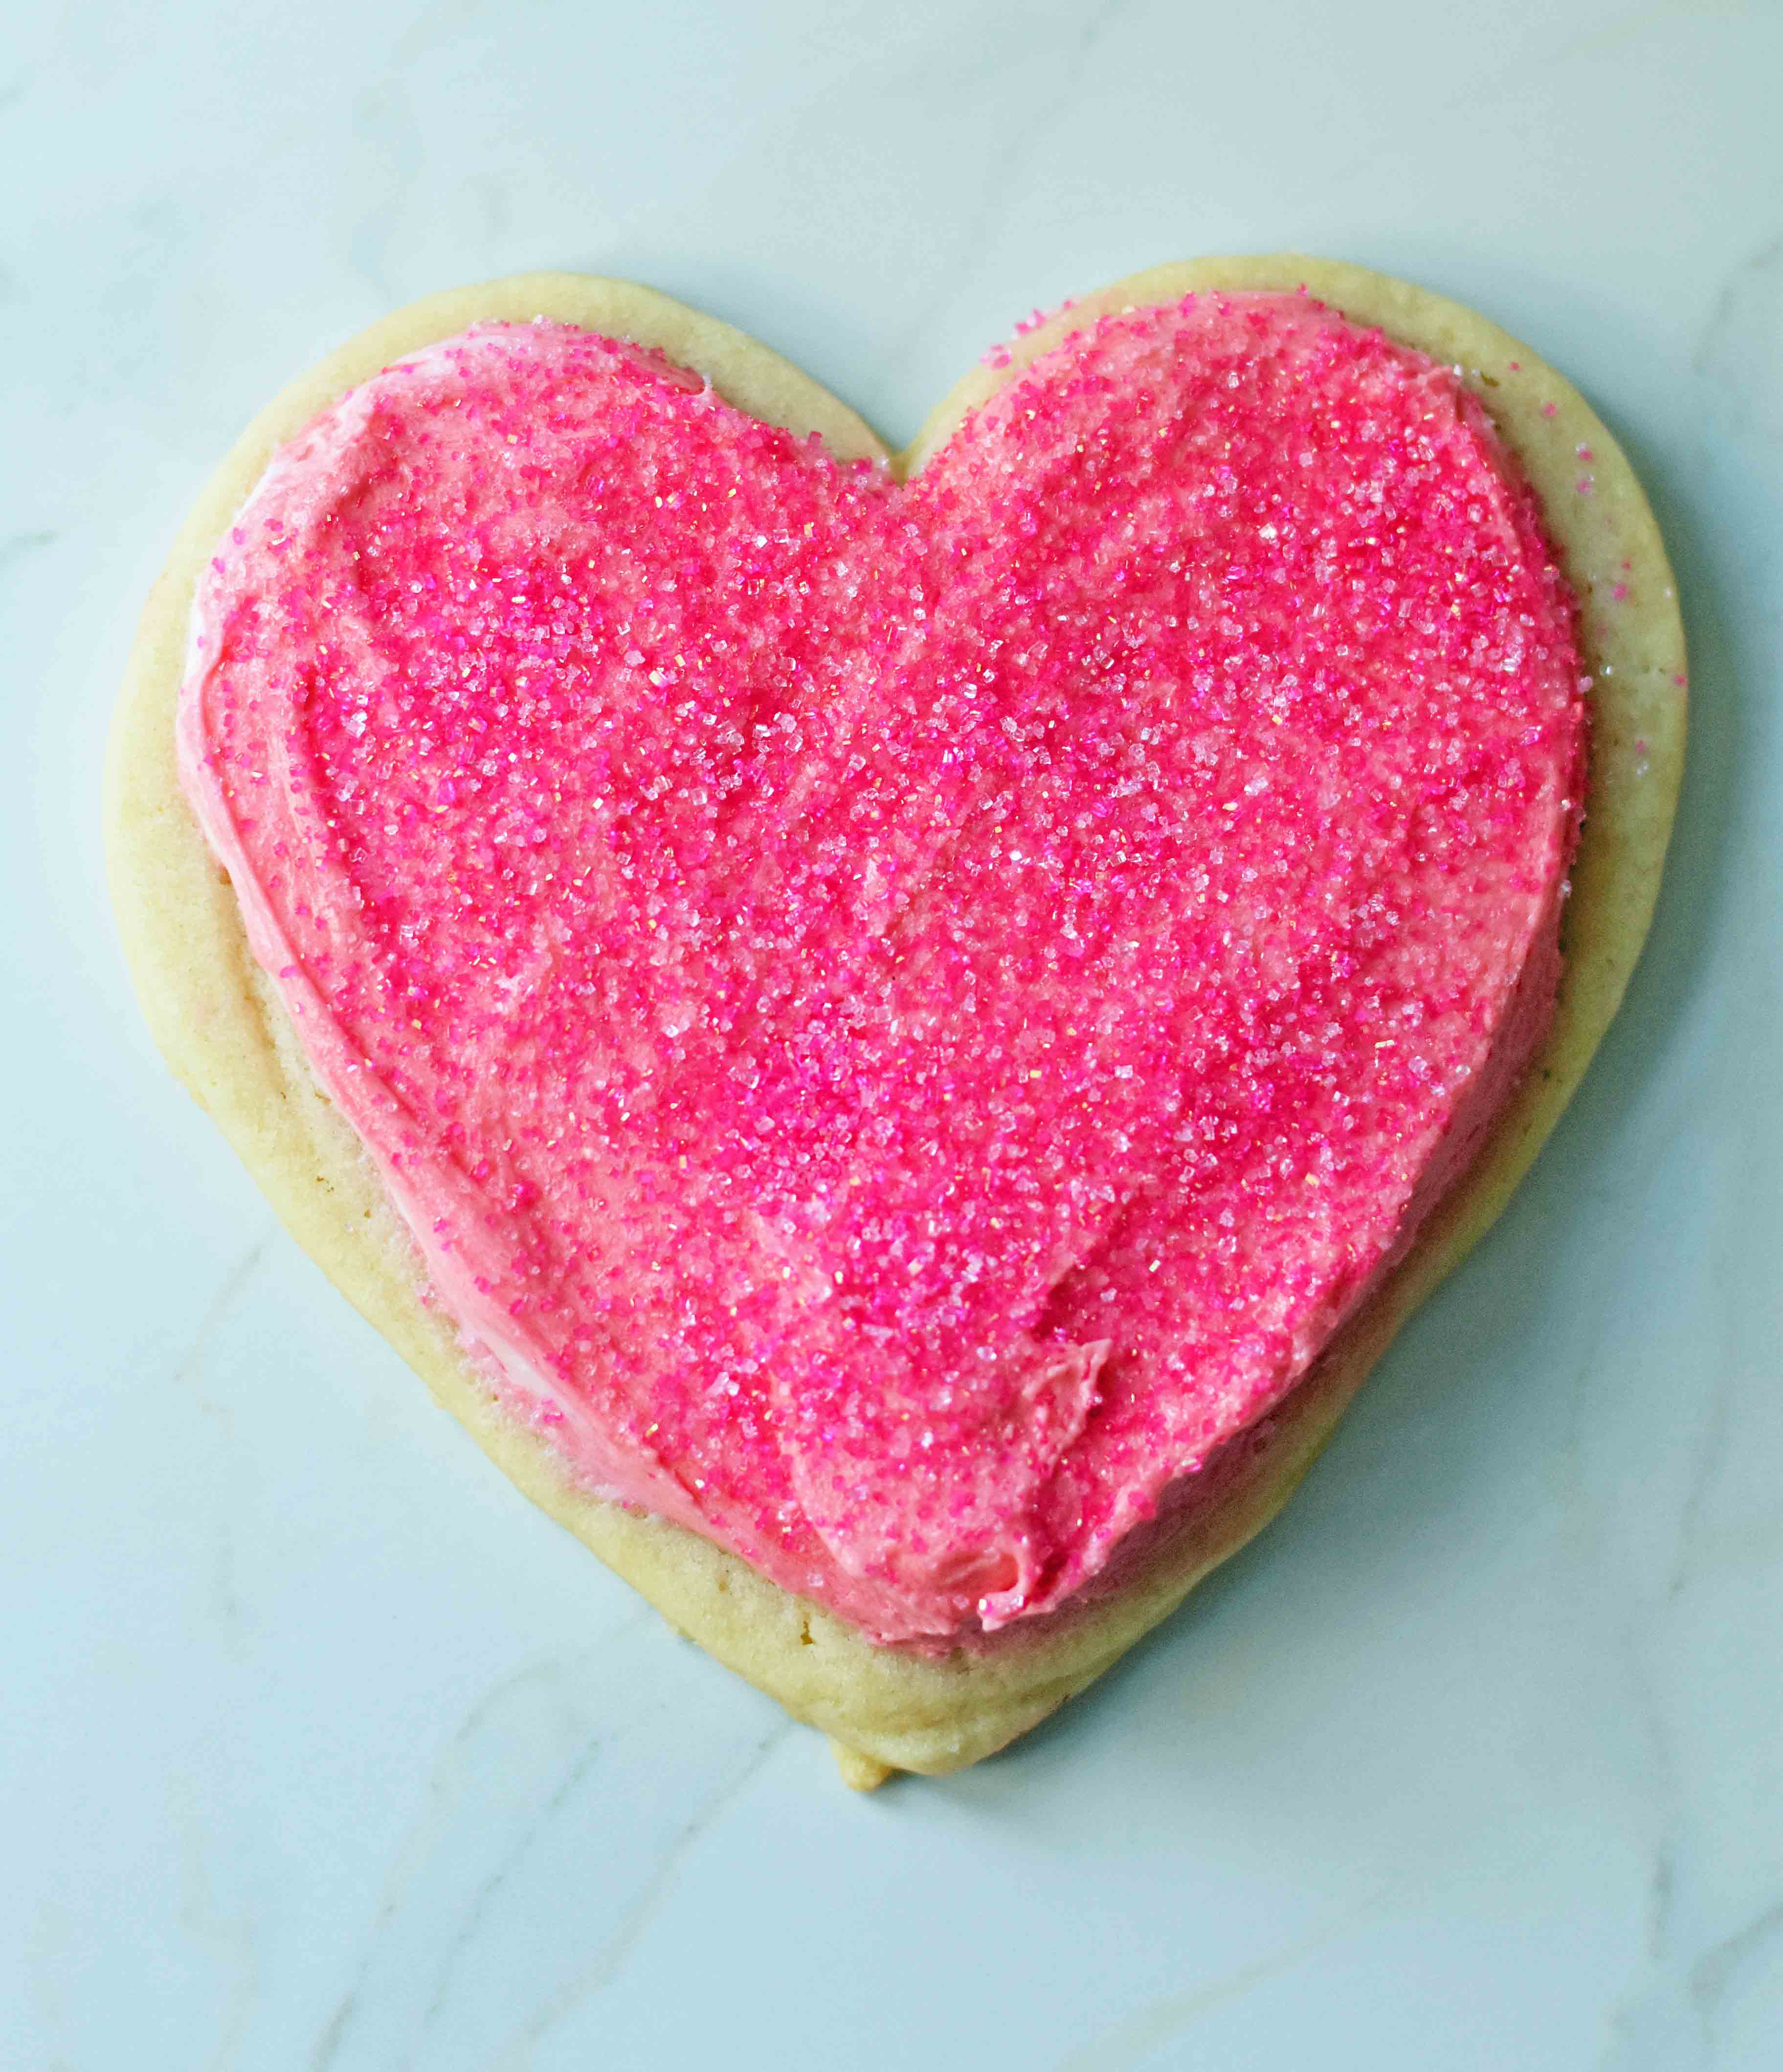 Soft Chewy Sugar Valentine's Day Cookie. How to make perfect heart shaped cookies with vanilla cream cheese buttercream frosting. www.modernhoney.com